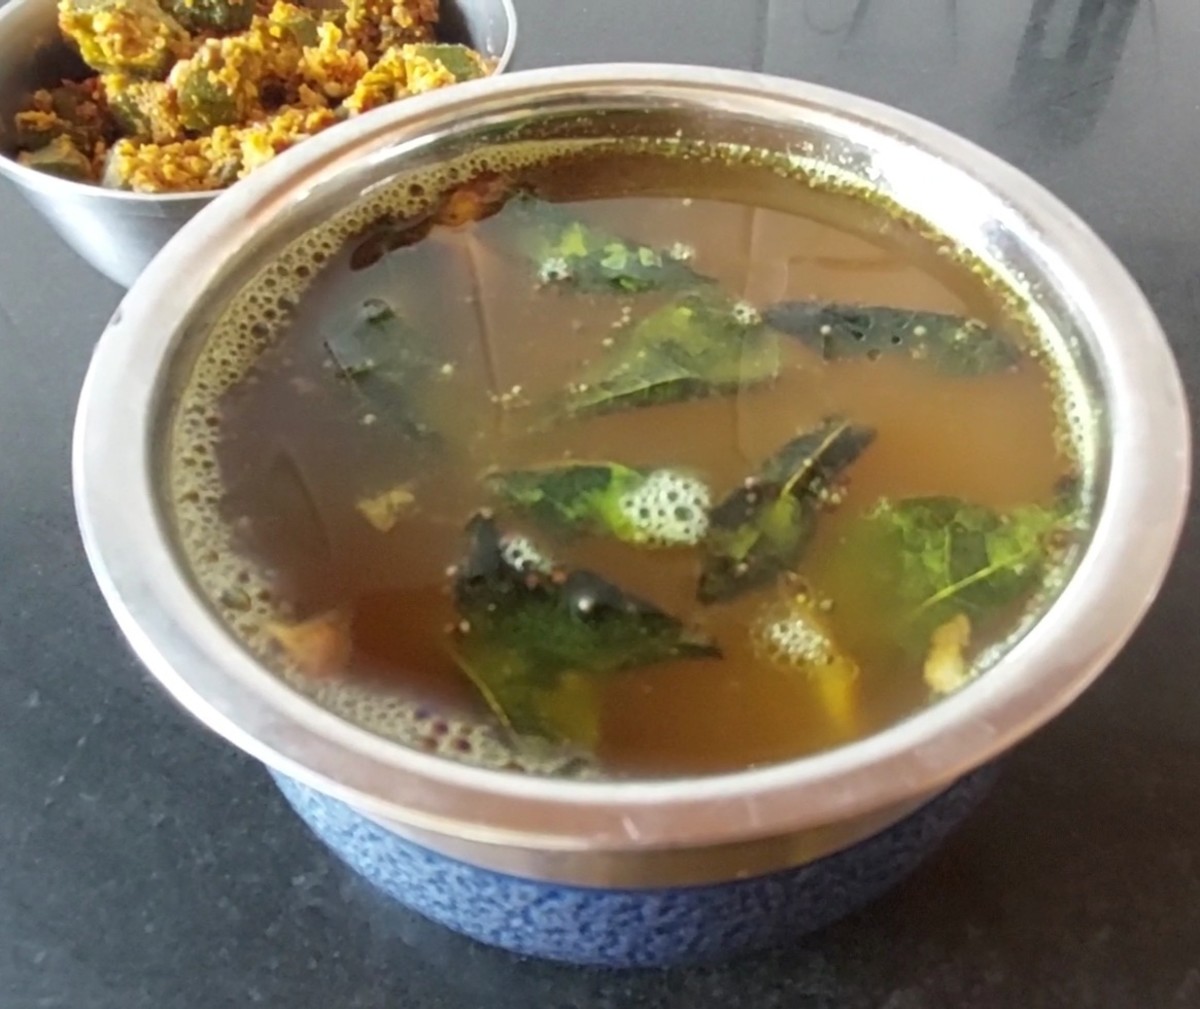 Tasty and healthy kokum rasam is ready to serve. Serve hot with rice.